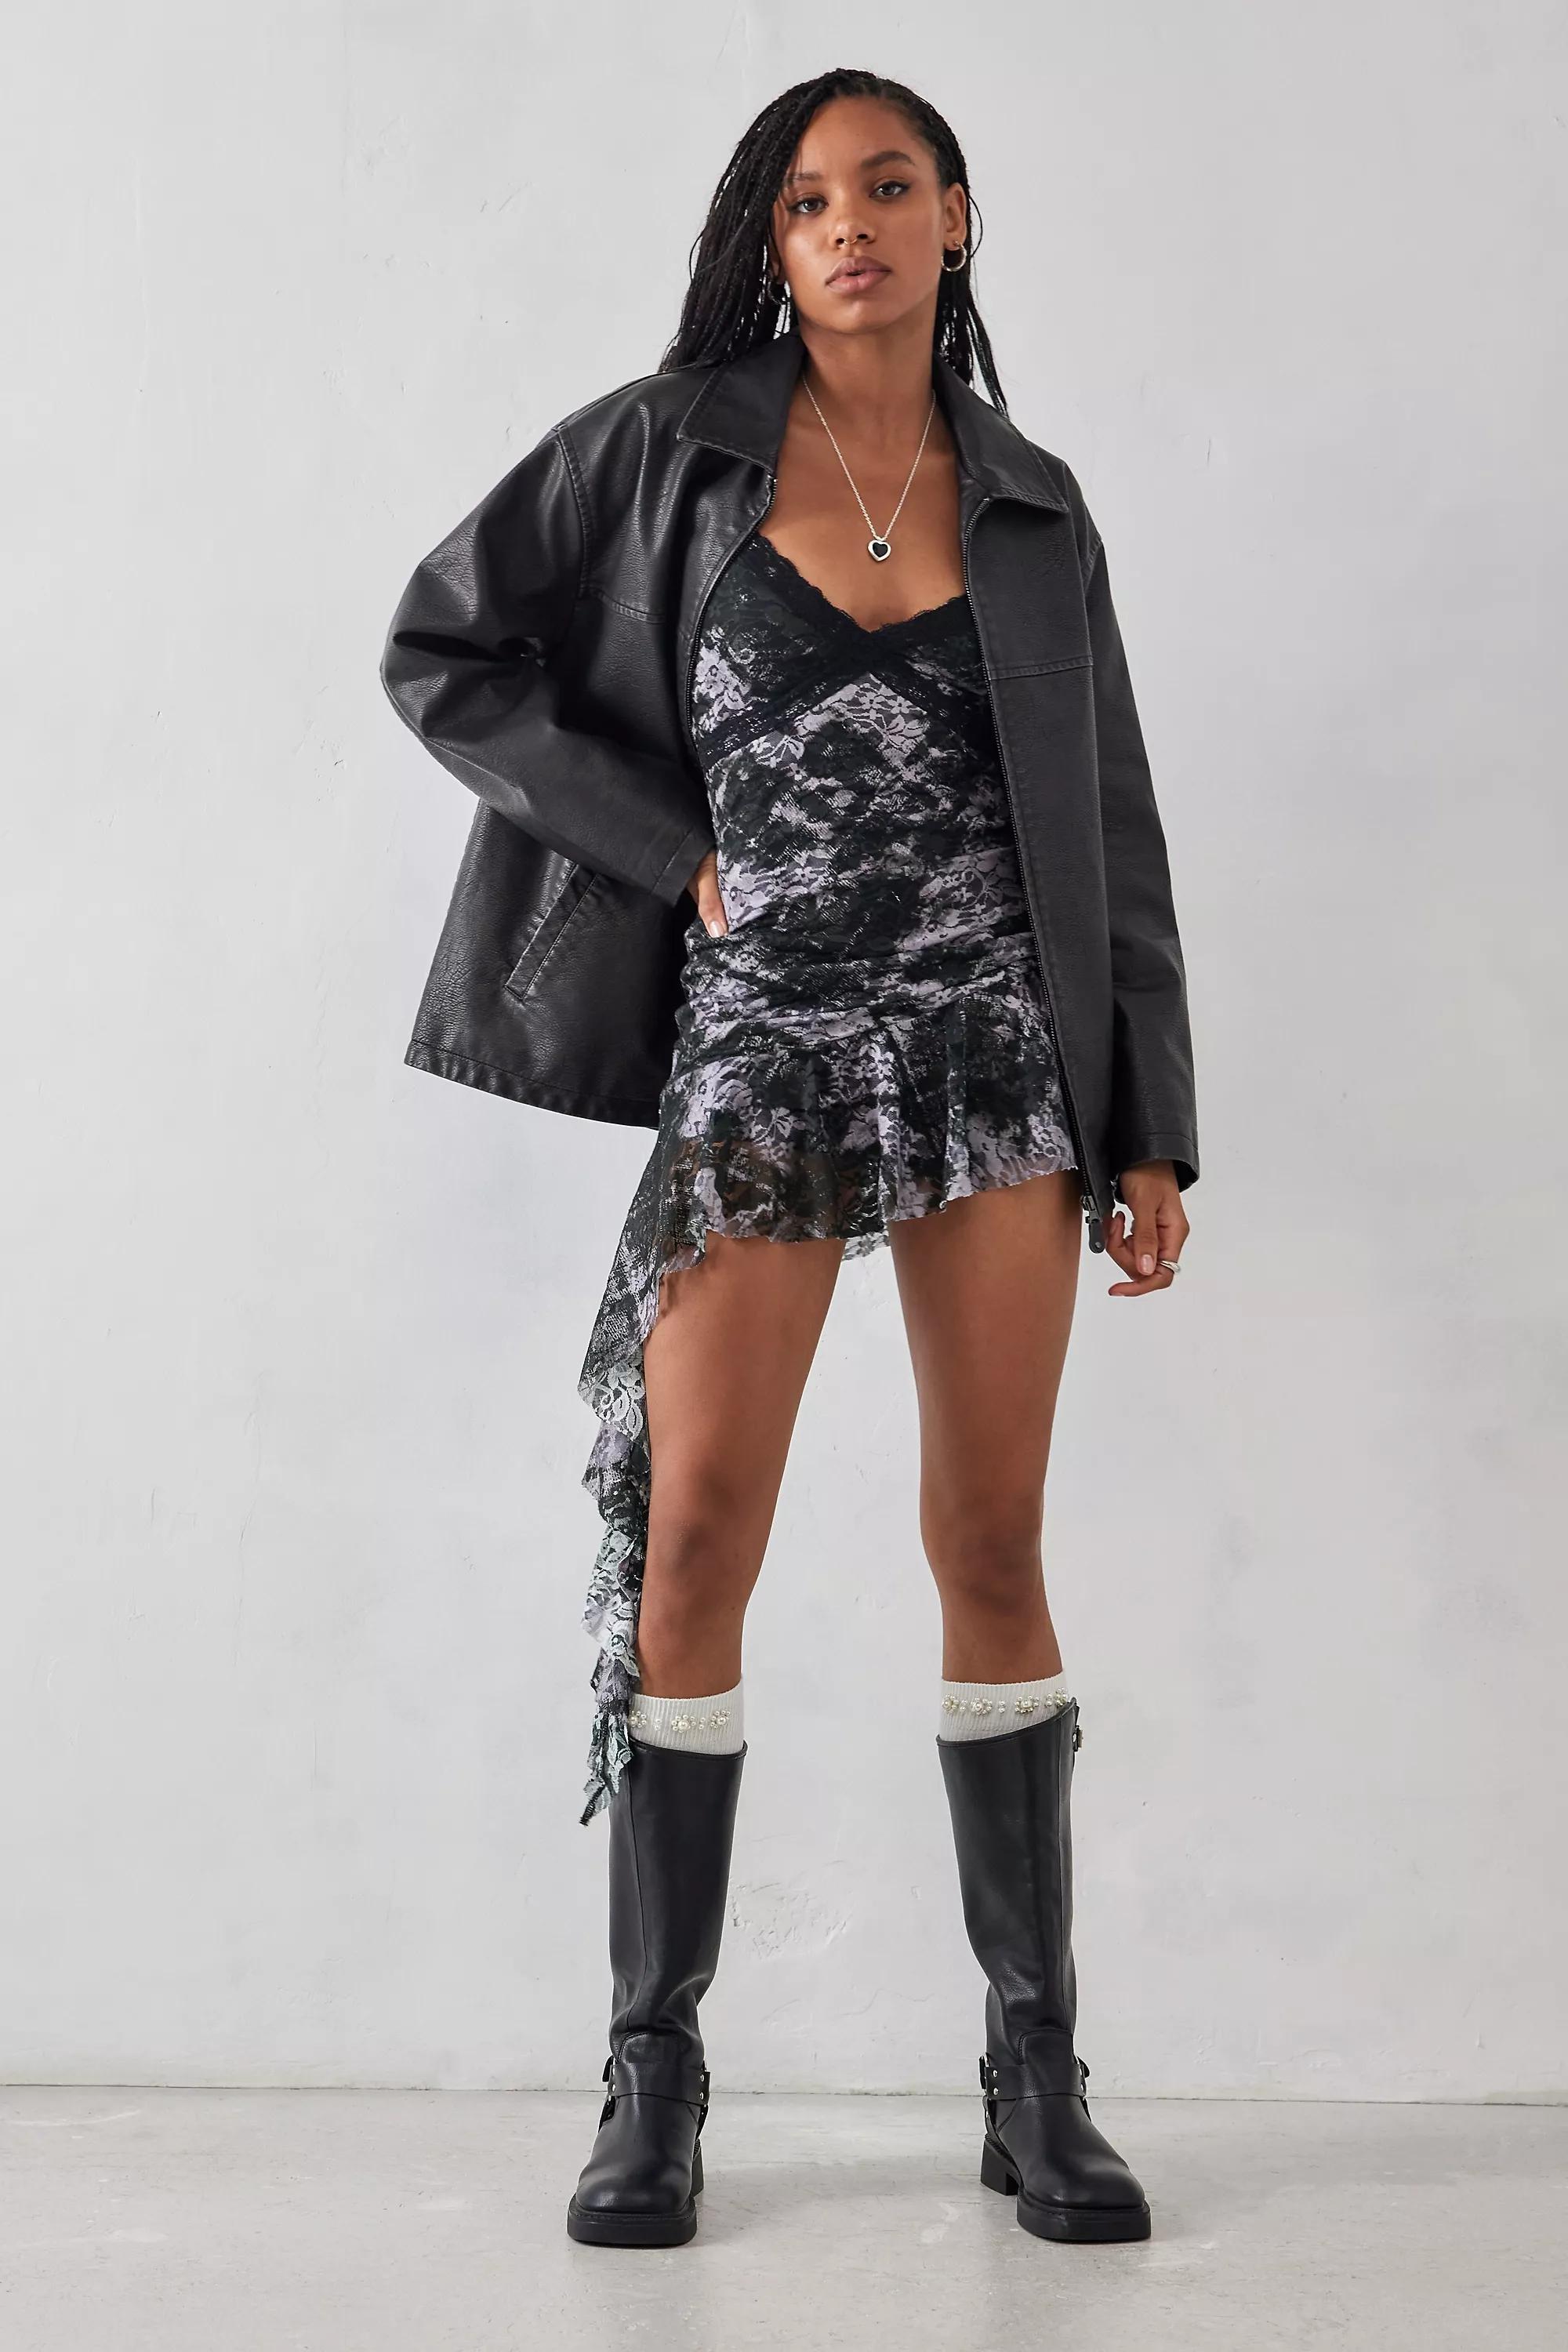 Urban Outfitters - Black Lace Insert Asymmetrical Playsuit